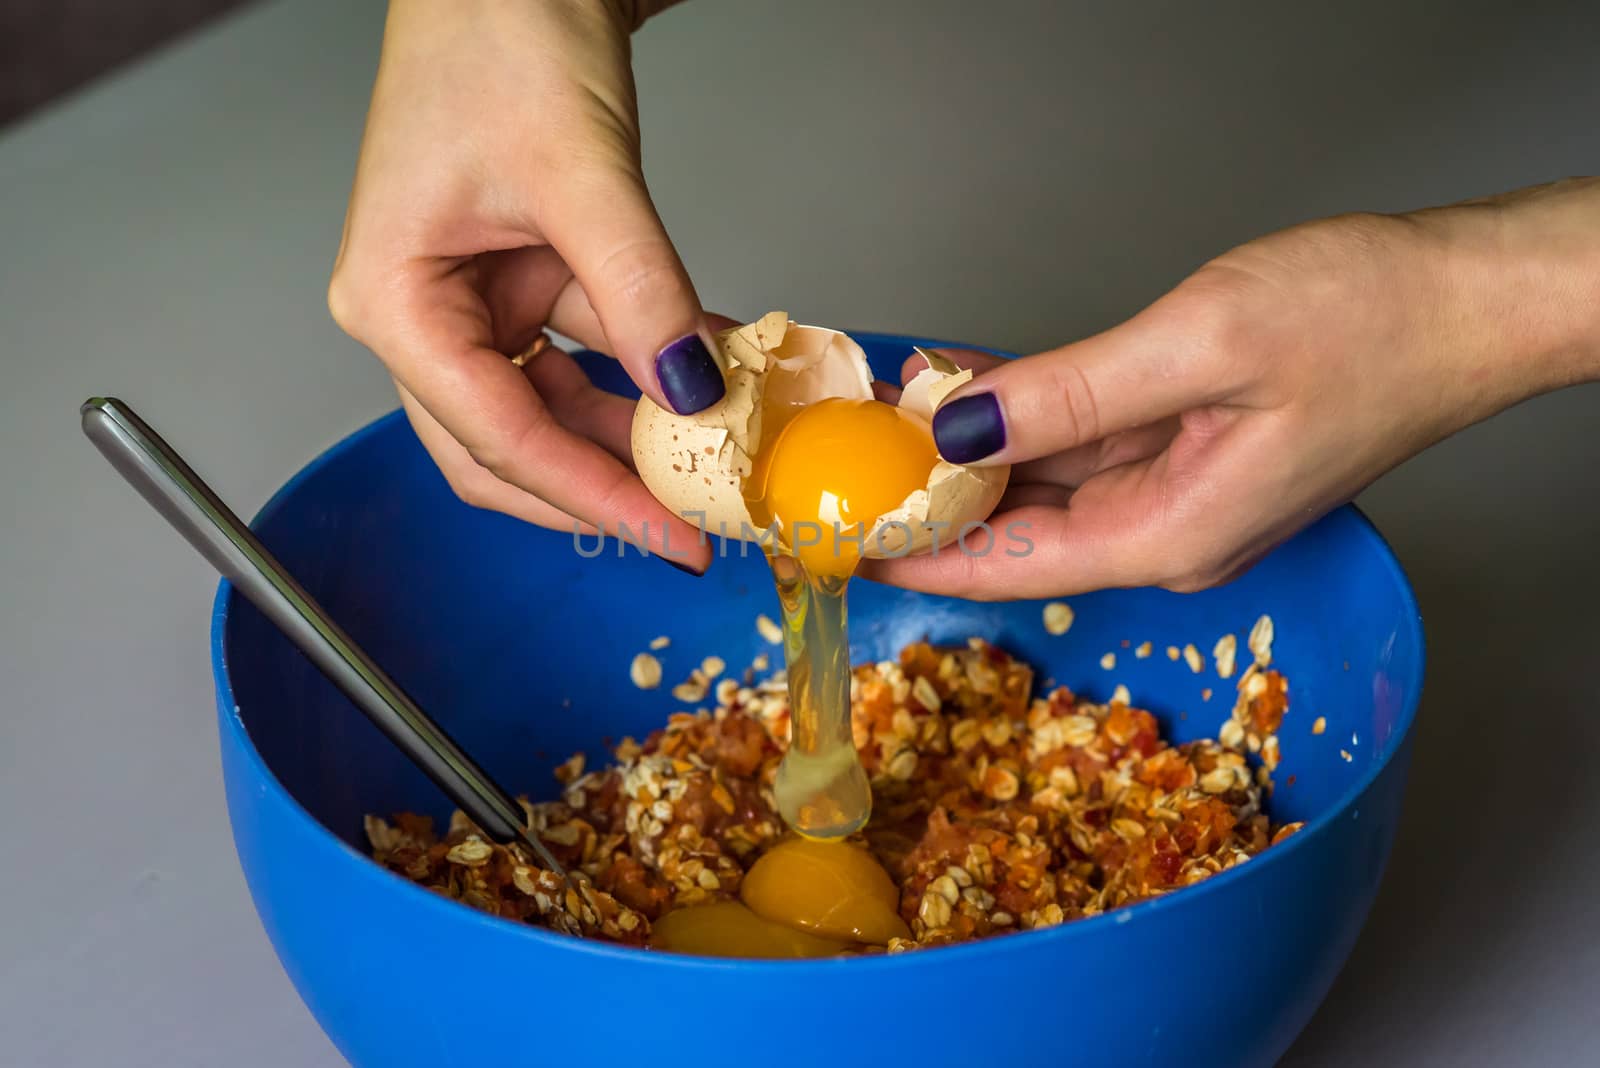 hand pours out raw egg of the shell in blue bowl